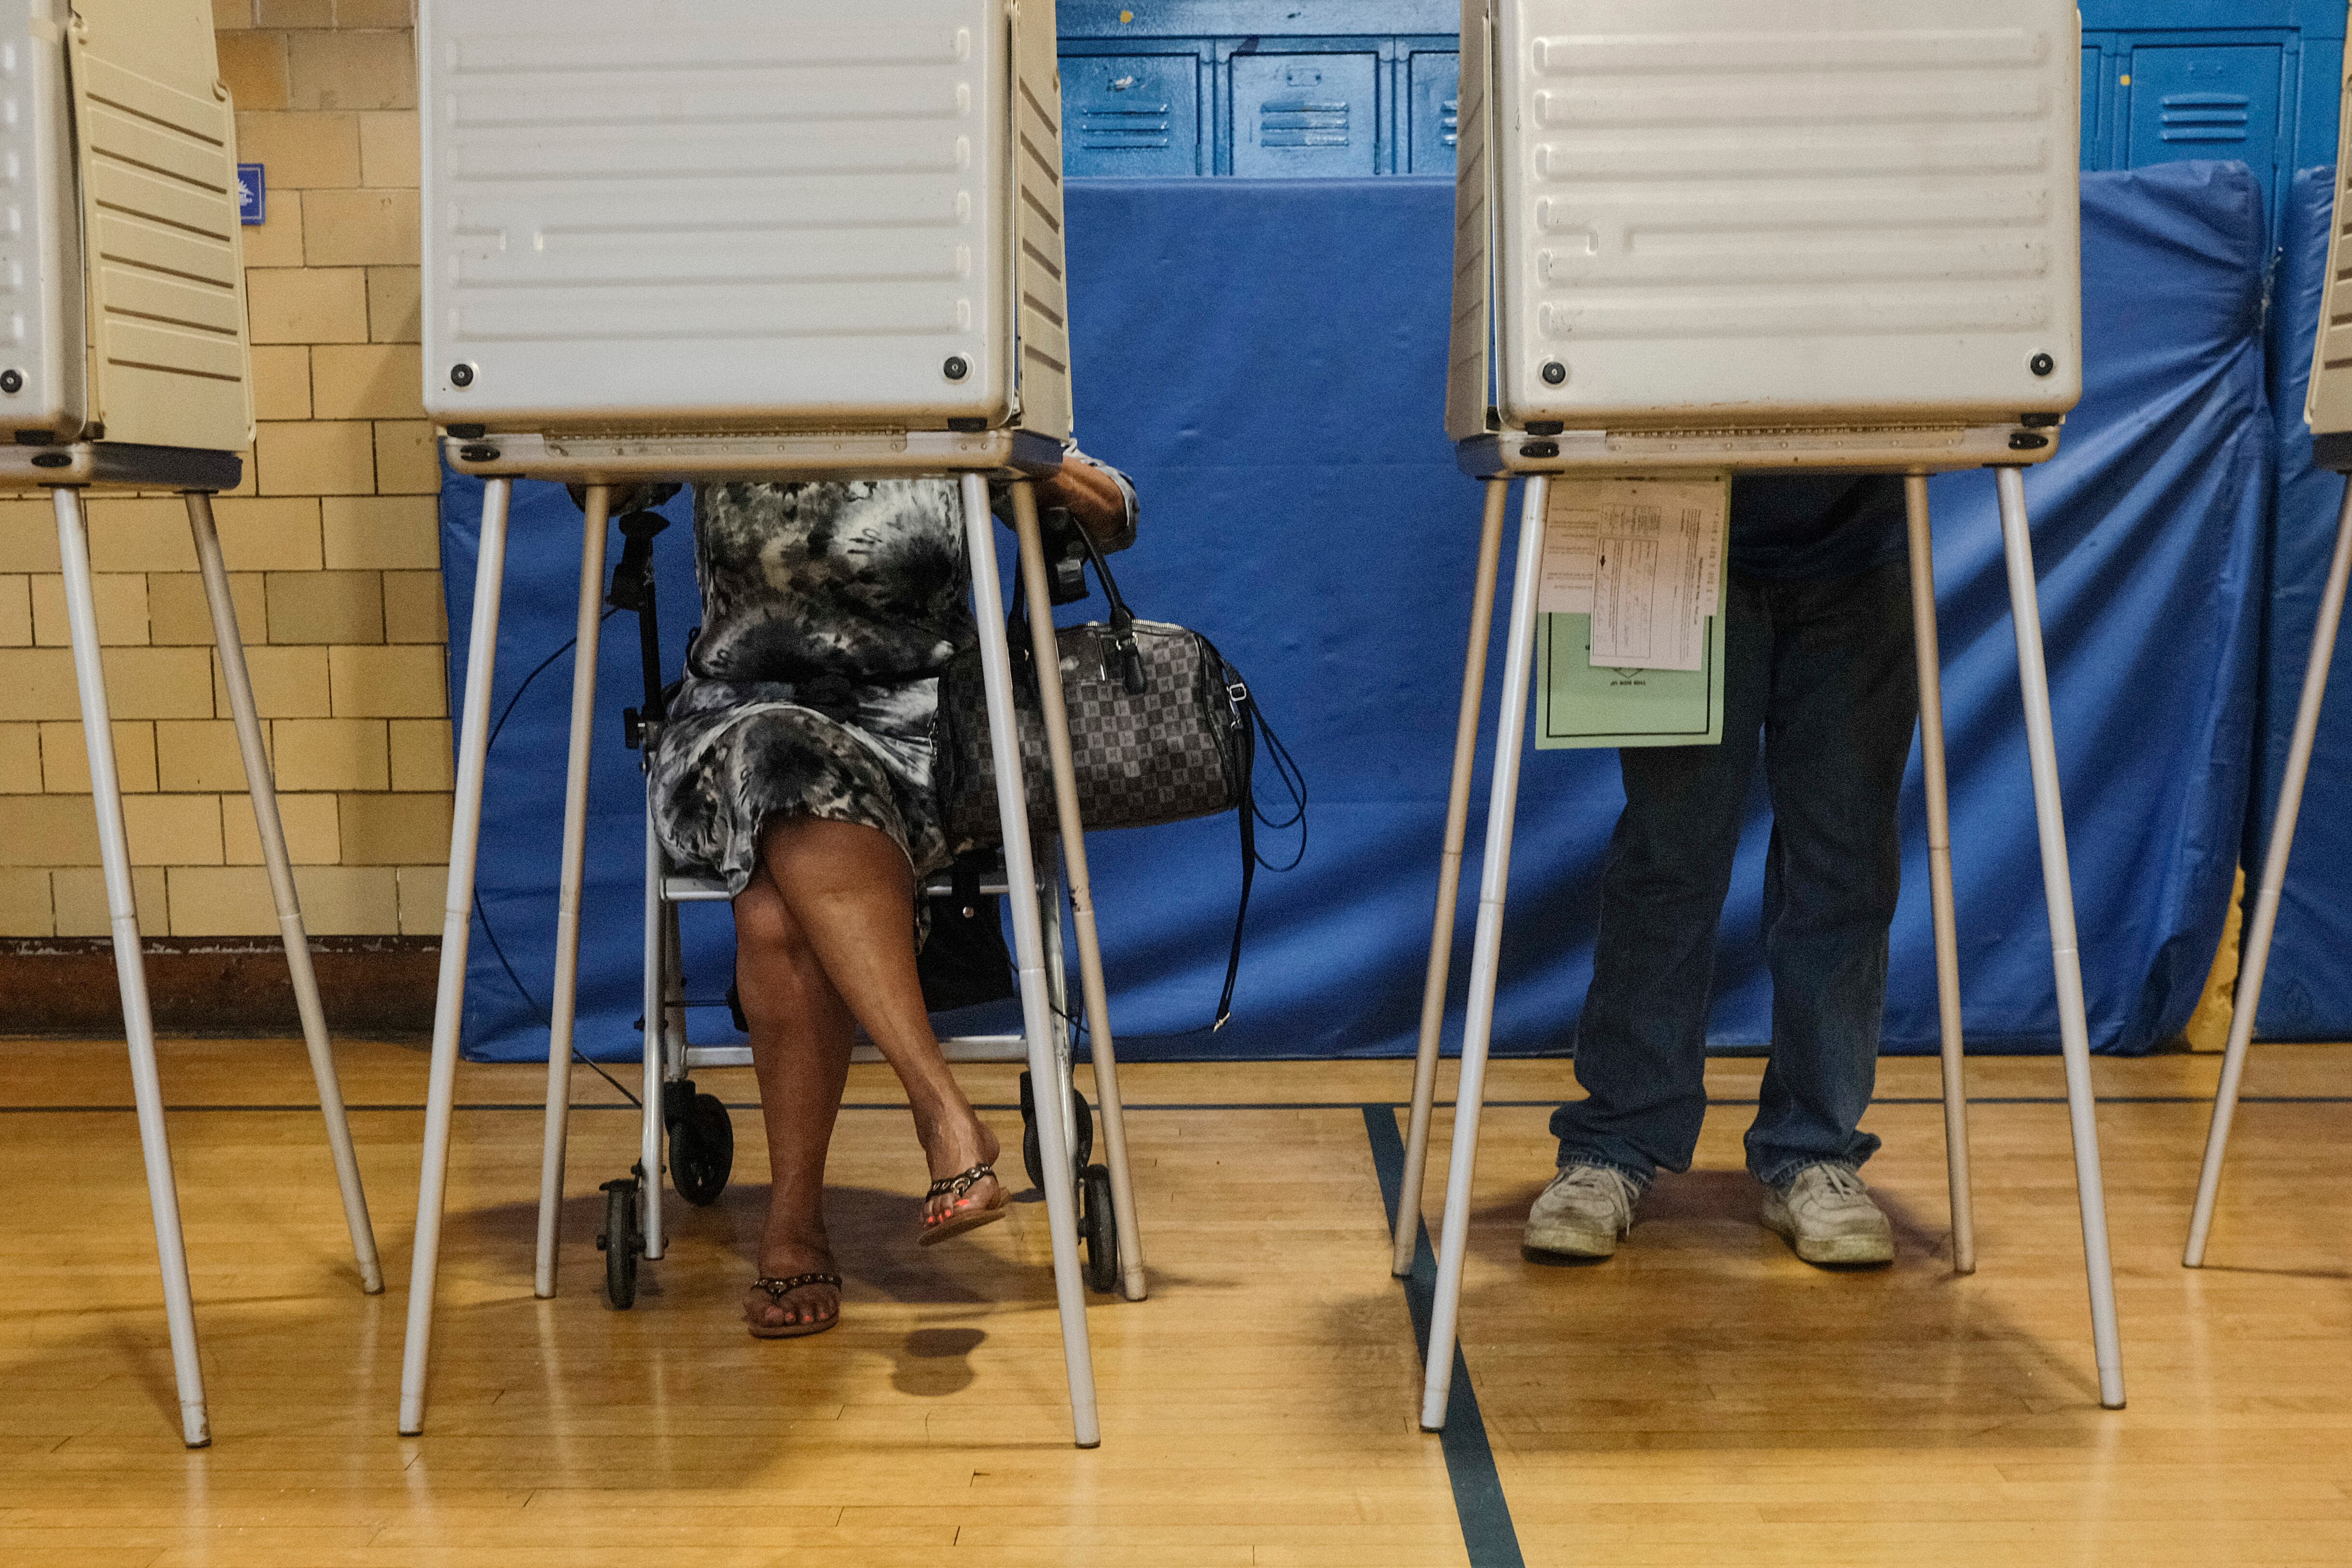 Two people cast their ballots in voting booths. Their top halves are behind a voting screen and their legs are visible beneath the table. The voter on the left is sitting in a chair with legs crossed. The voter on the right is standing.